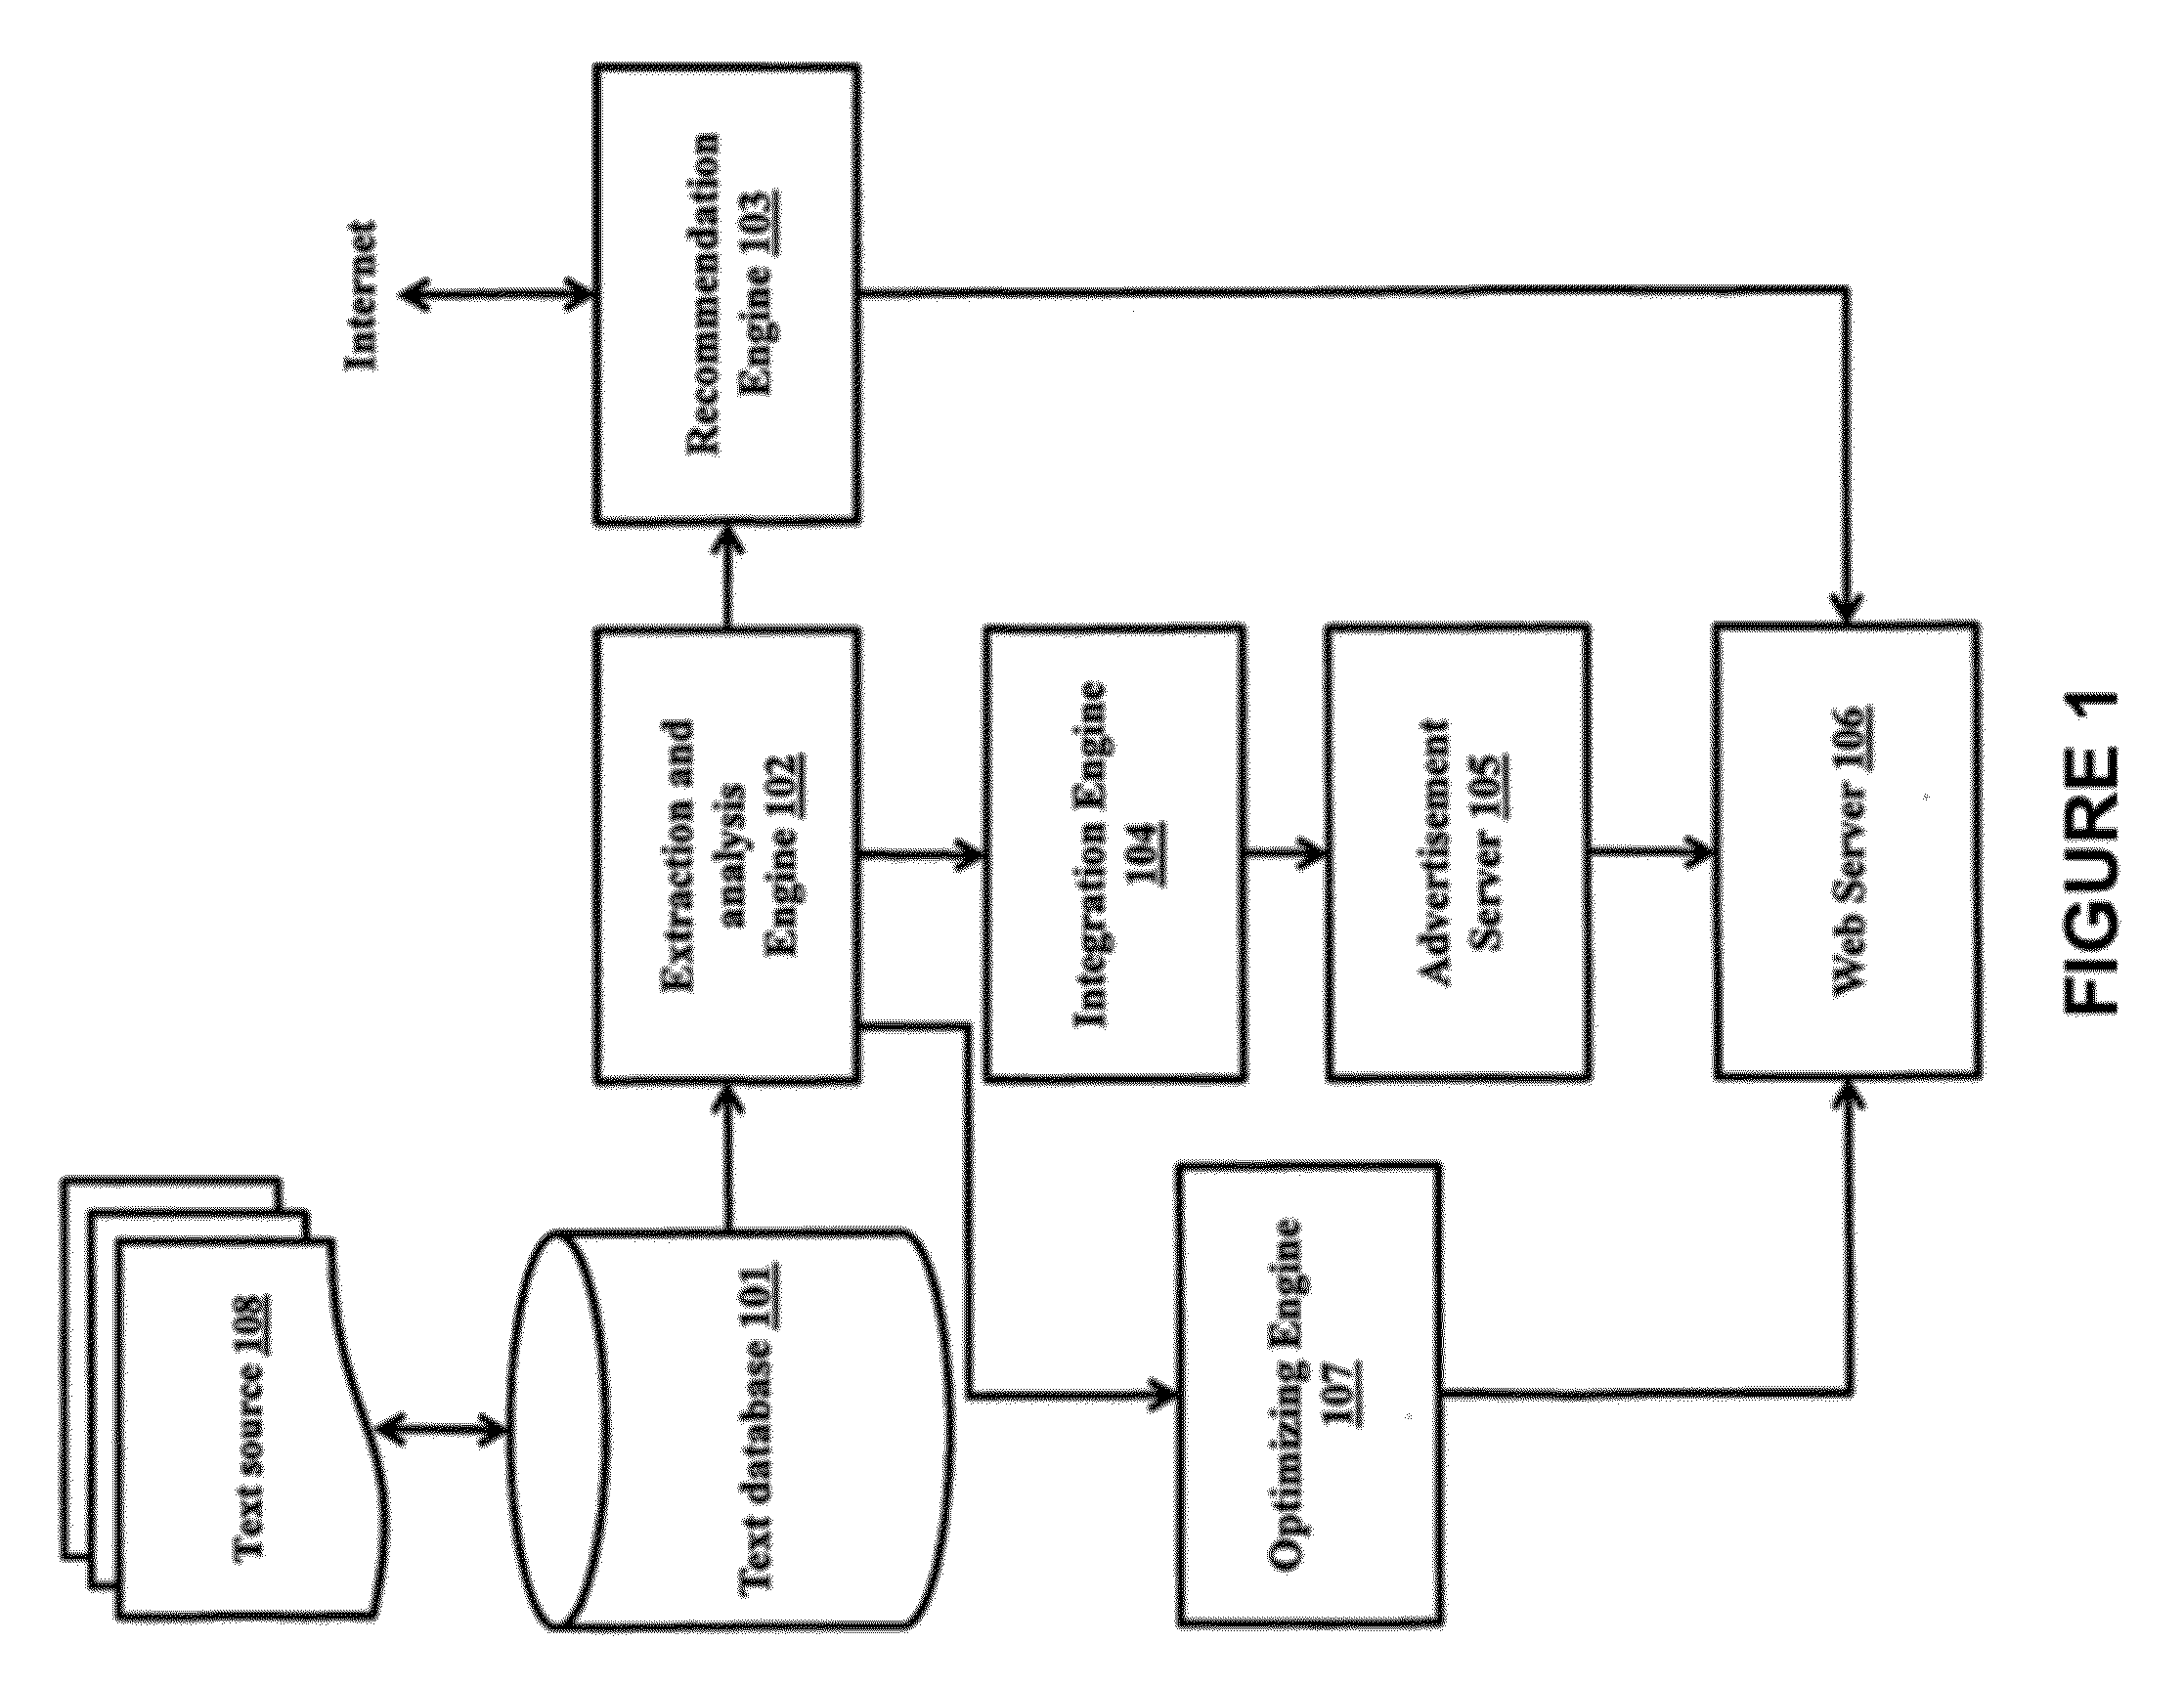 Method and apparatus for enhancing customer service experience